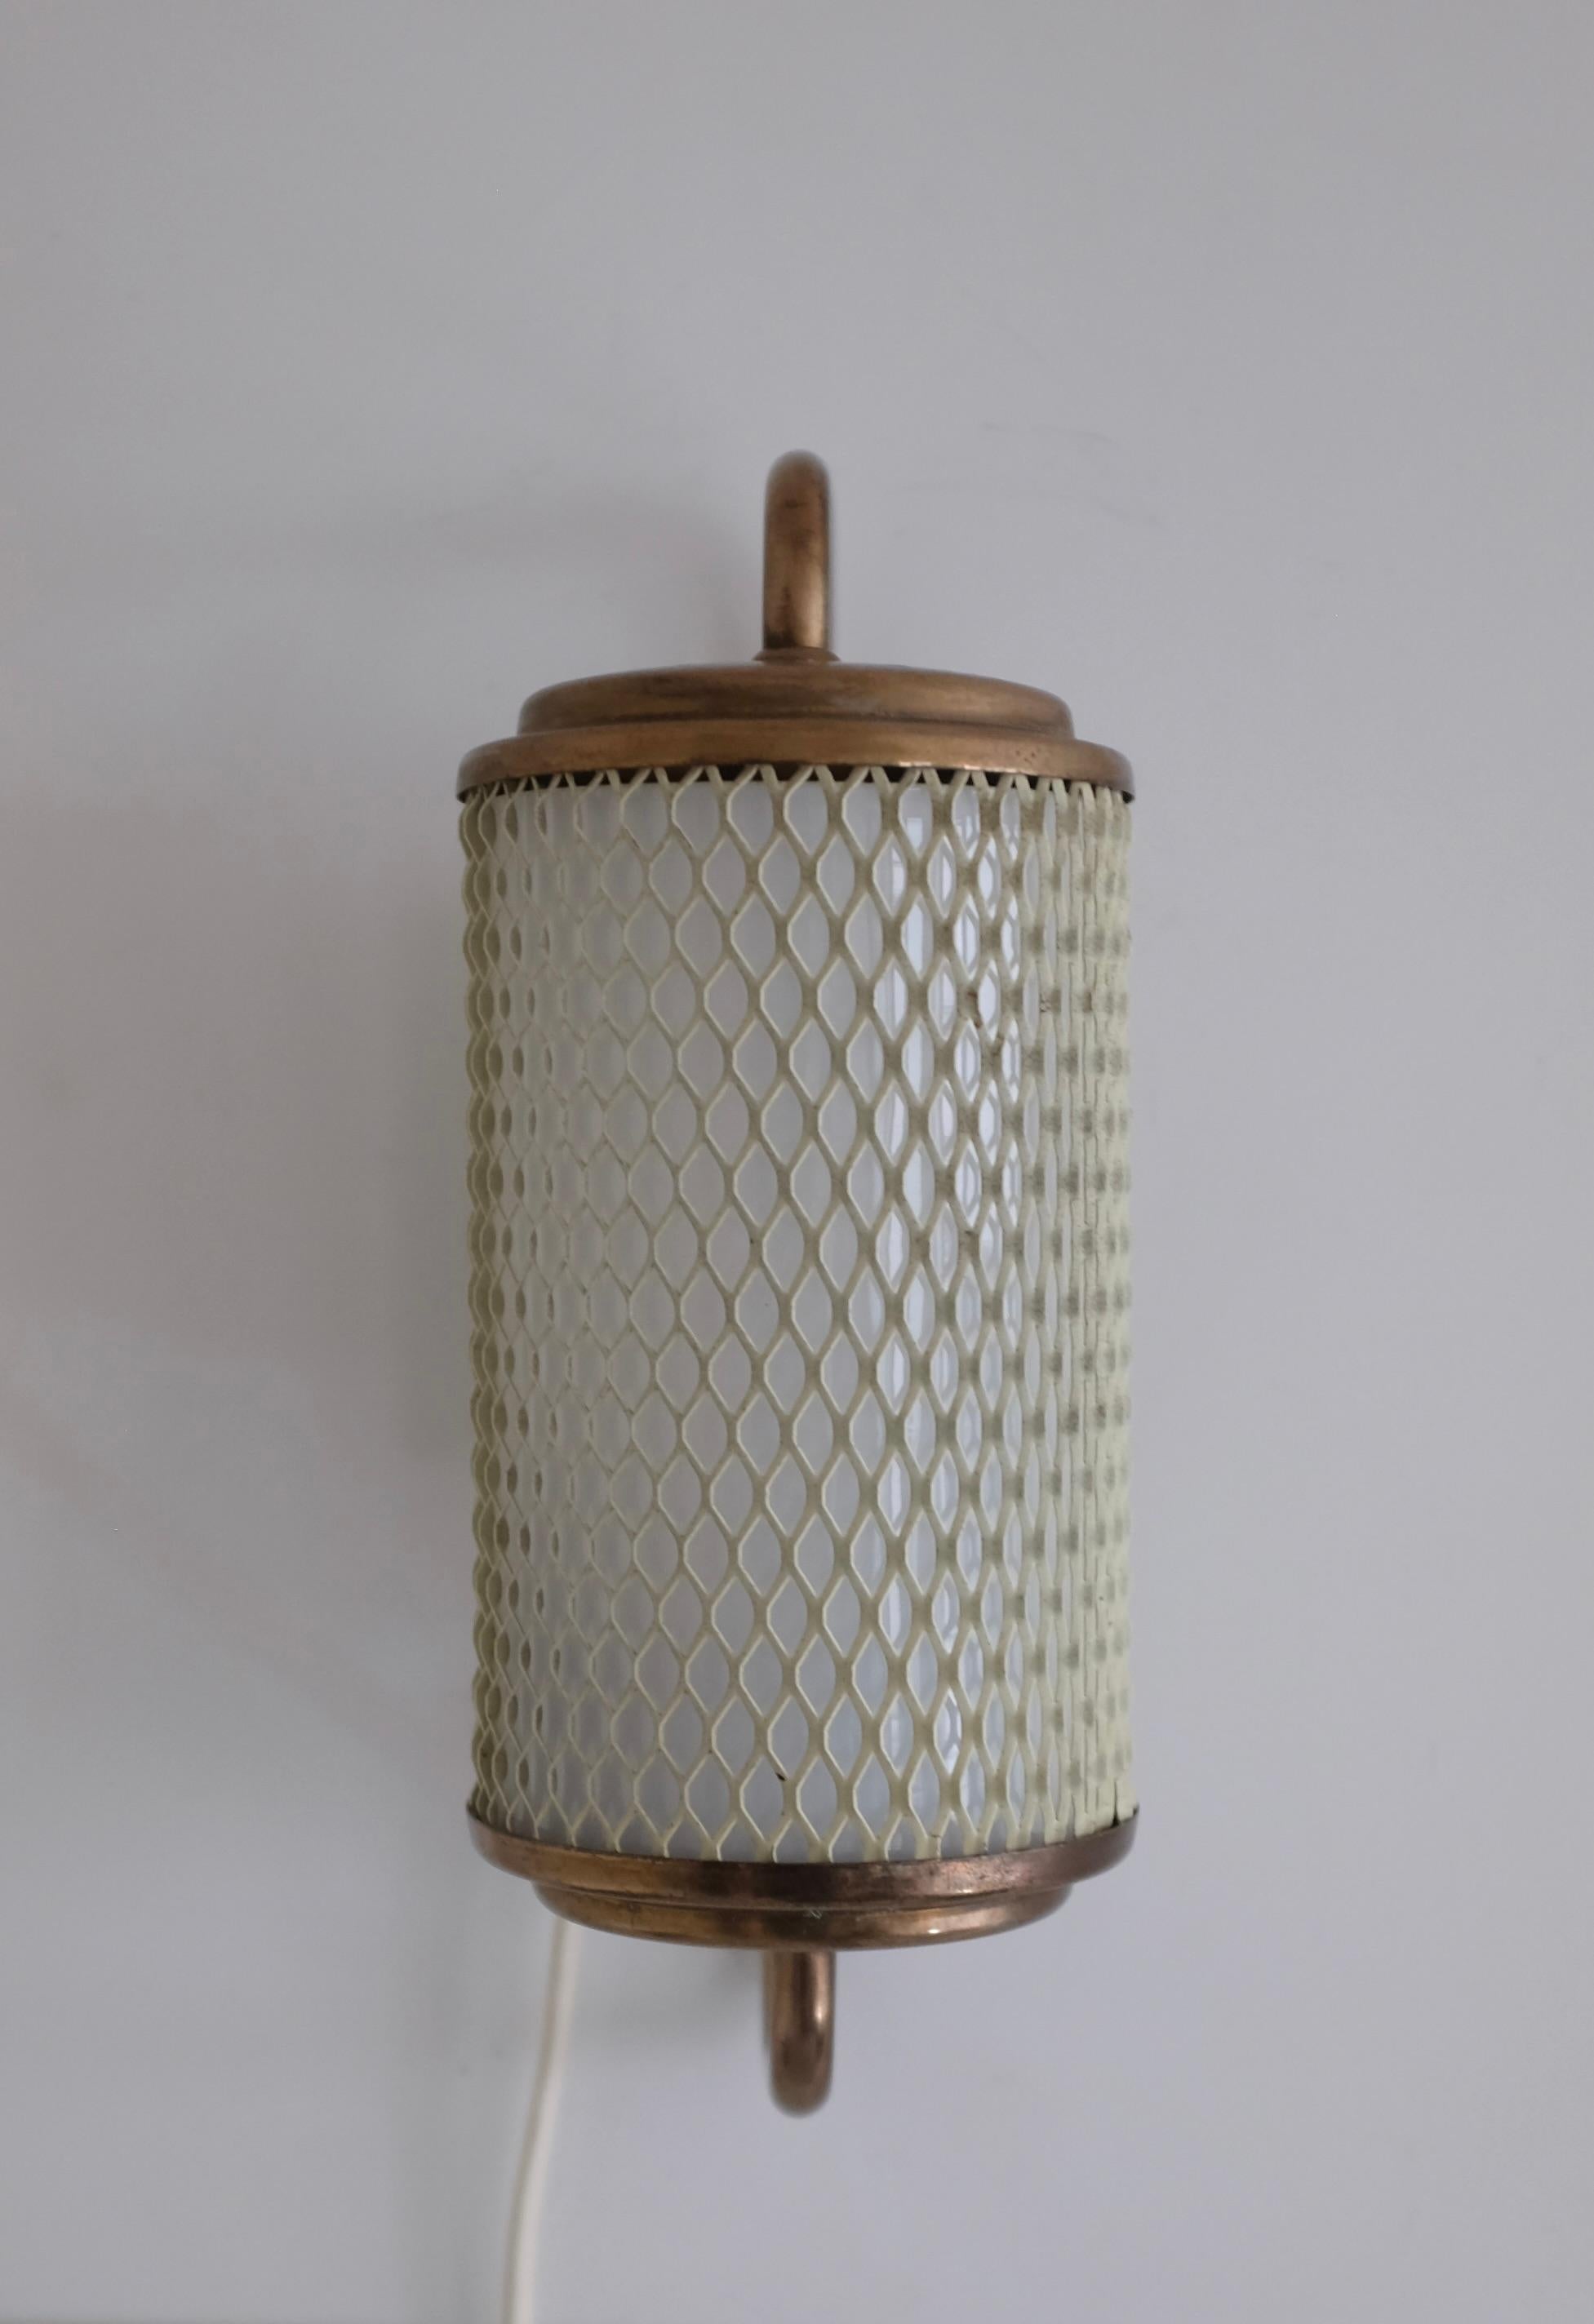 Charming Swedish Modern Wall lamp made out of expanded metal and brass. The metal creates a mesh design in off white with an internal white glass lantern. Can be mounted vertical or horizontal on the wall. From the 1940/50s by an unknown designer